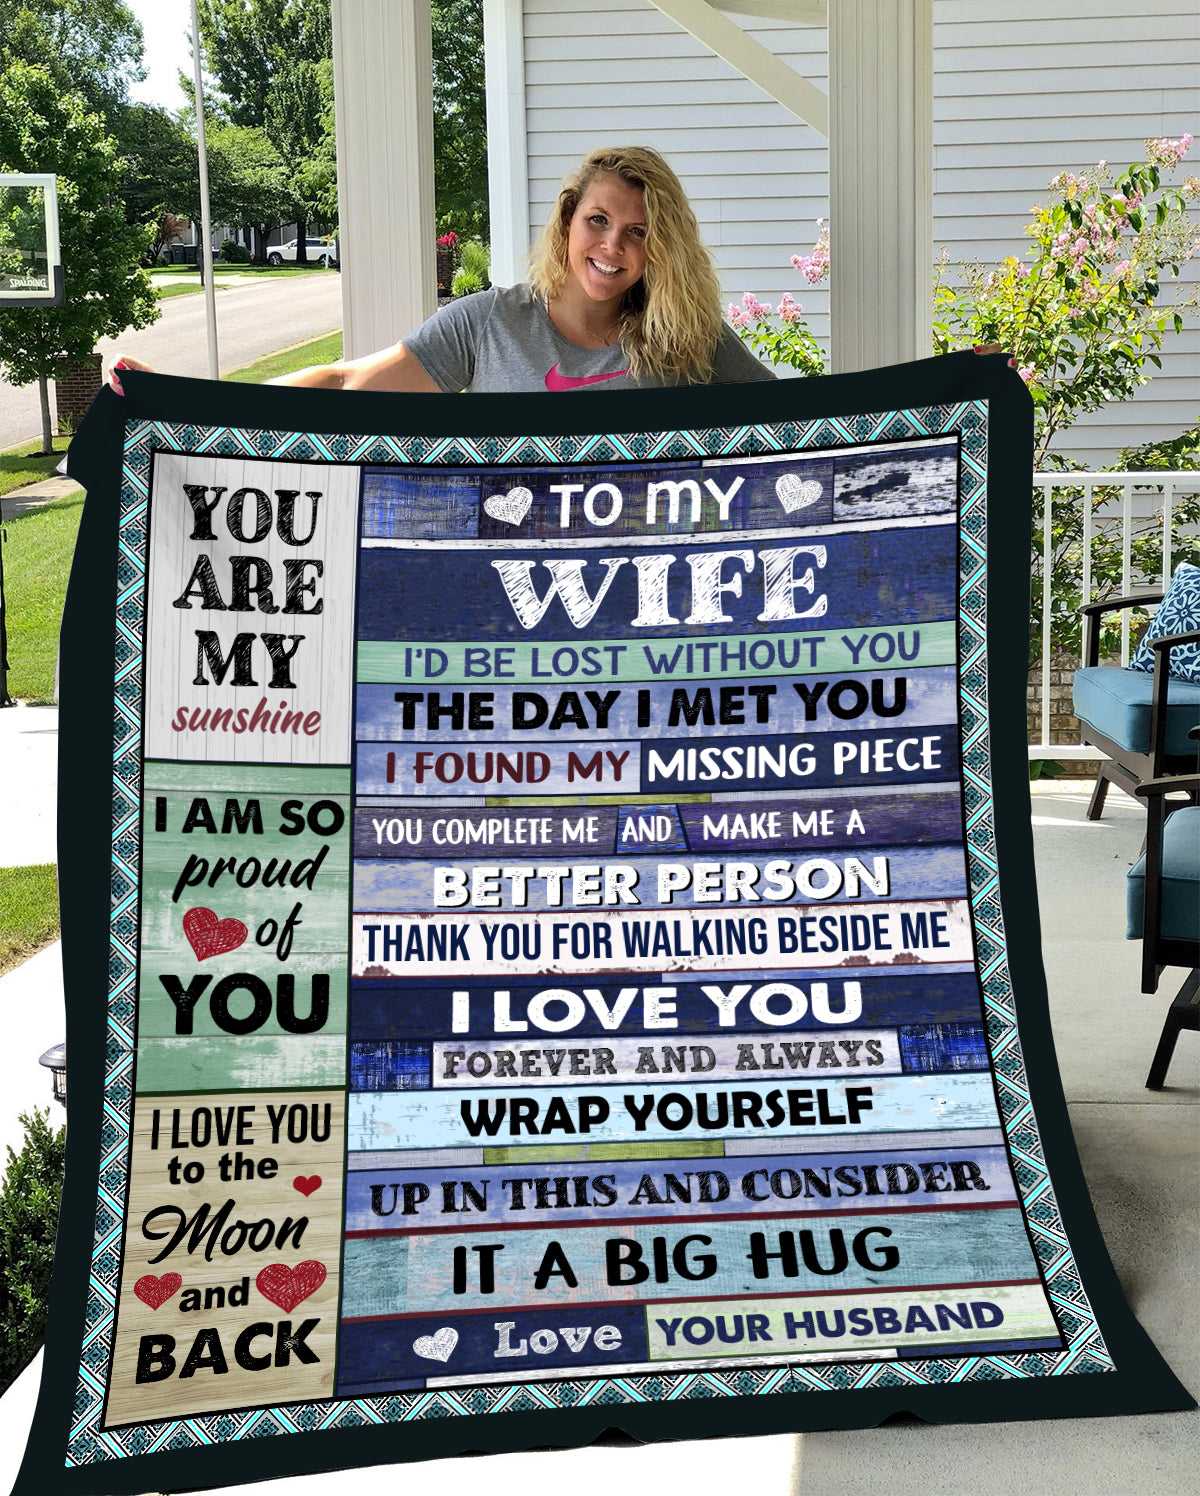 To My Wife - Love you Always Blue Plush Blanket - FREE USA SHIPPING